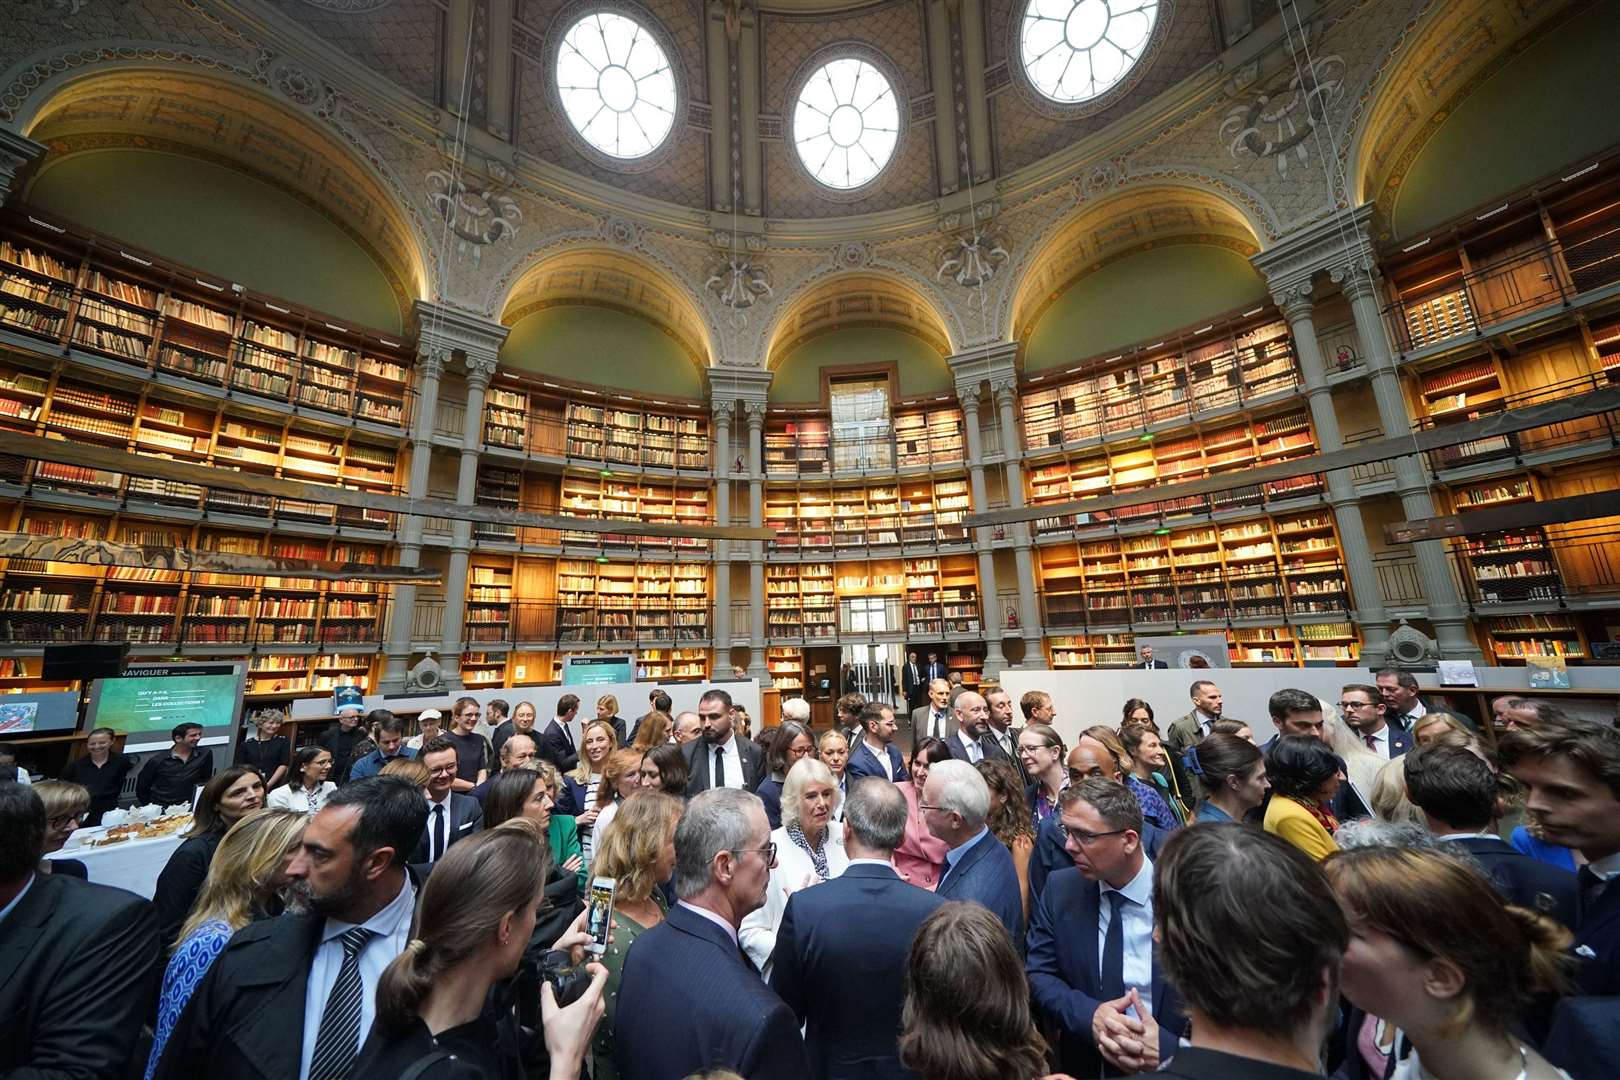 Camilla, centre in white, speaks with guests at the Bibliotheque Nationale de France in Paris (Yui Mok/PA)